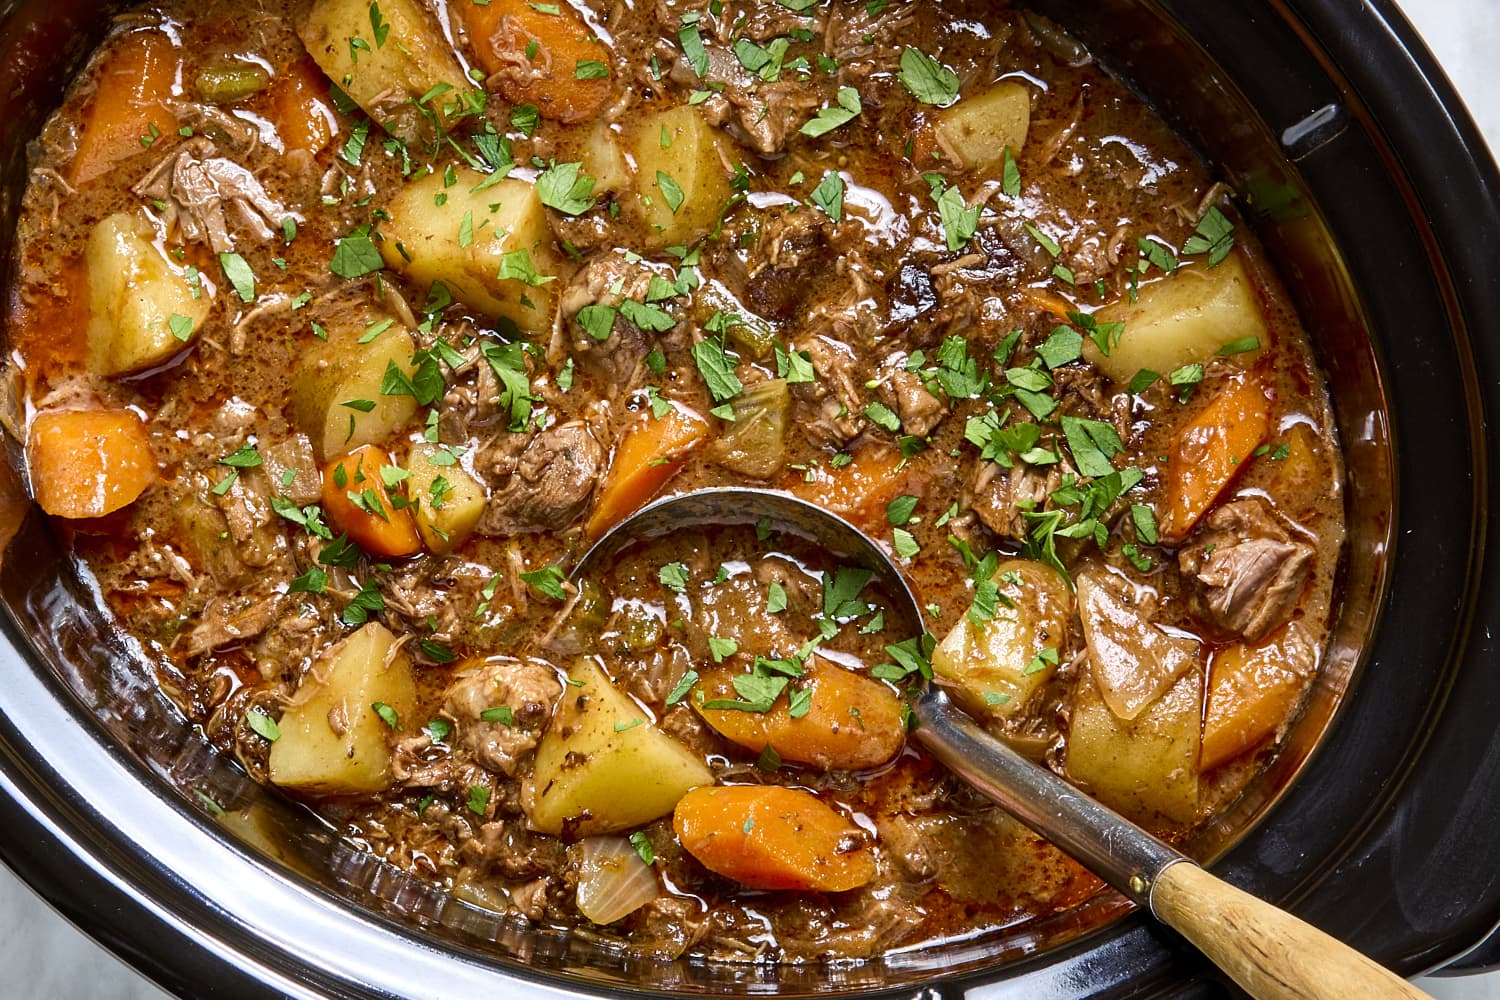 https://cdn.apartmenttherapy.info/image/upload/f_auto,q_auto:eco,c_fill,g_auto,w_1500,ar_3:2/k%2FPhoto%2FRecipes%2F2023-12-slow-cooker-beef-stew%2Fslow-cooker-beef-stew-129-horizontal